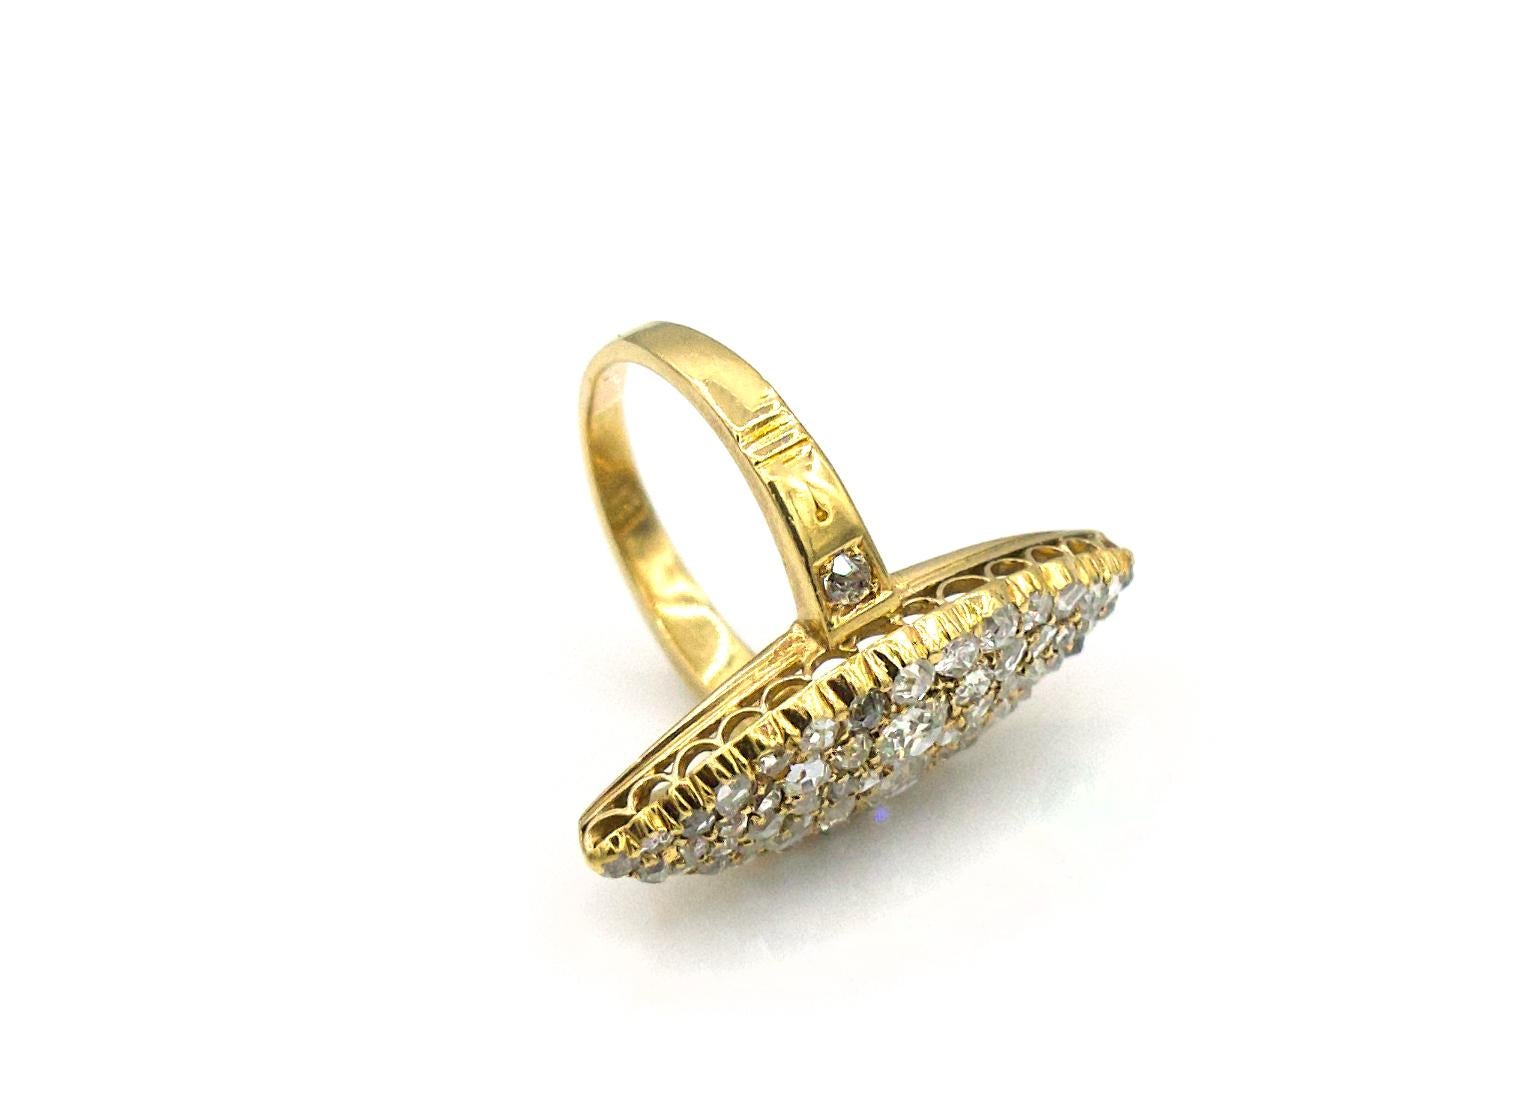 This statement antique ring from the 1920s features a marquise shape that is made of 18K yellow gold and a mix of shiny rose-cut and old miner's diamonds. The diamonds weigh in at approximately 3 Carats total. An extra special component is the